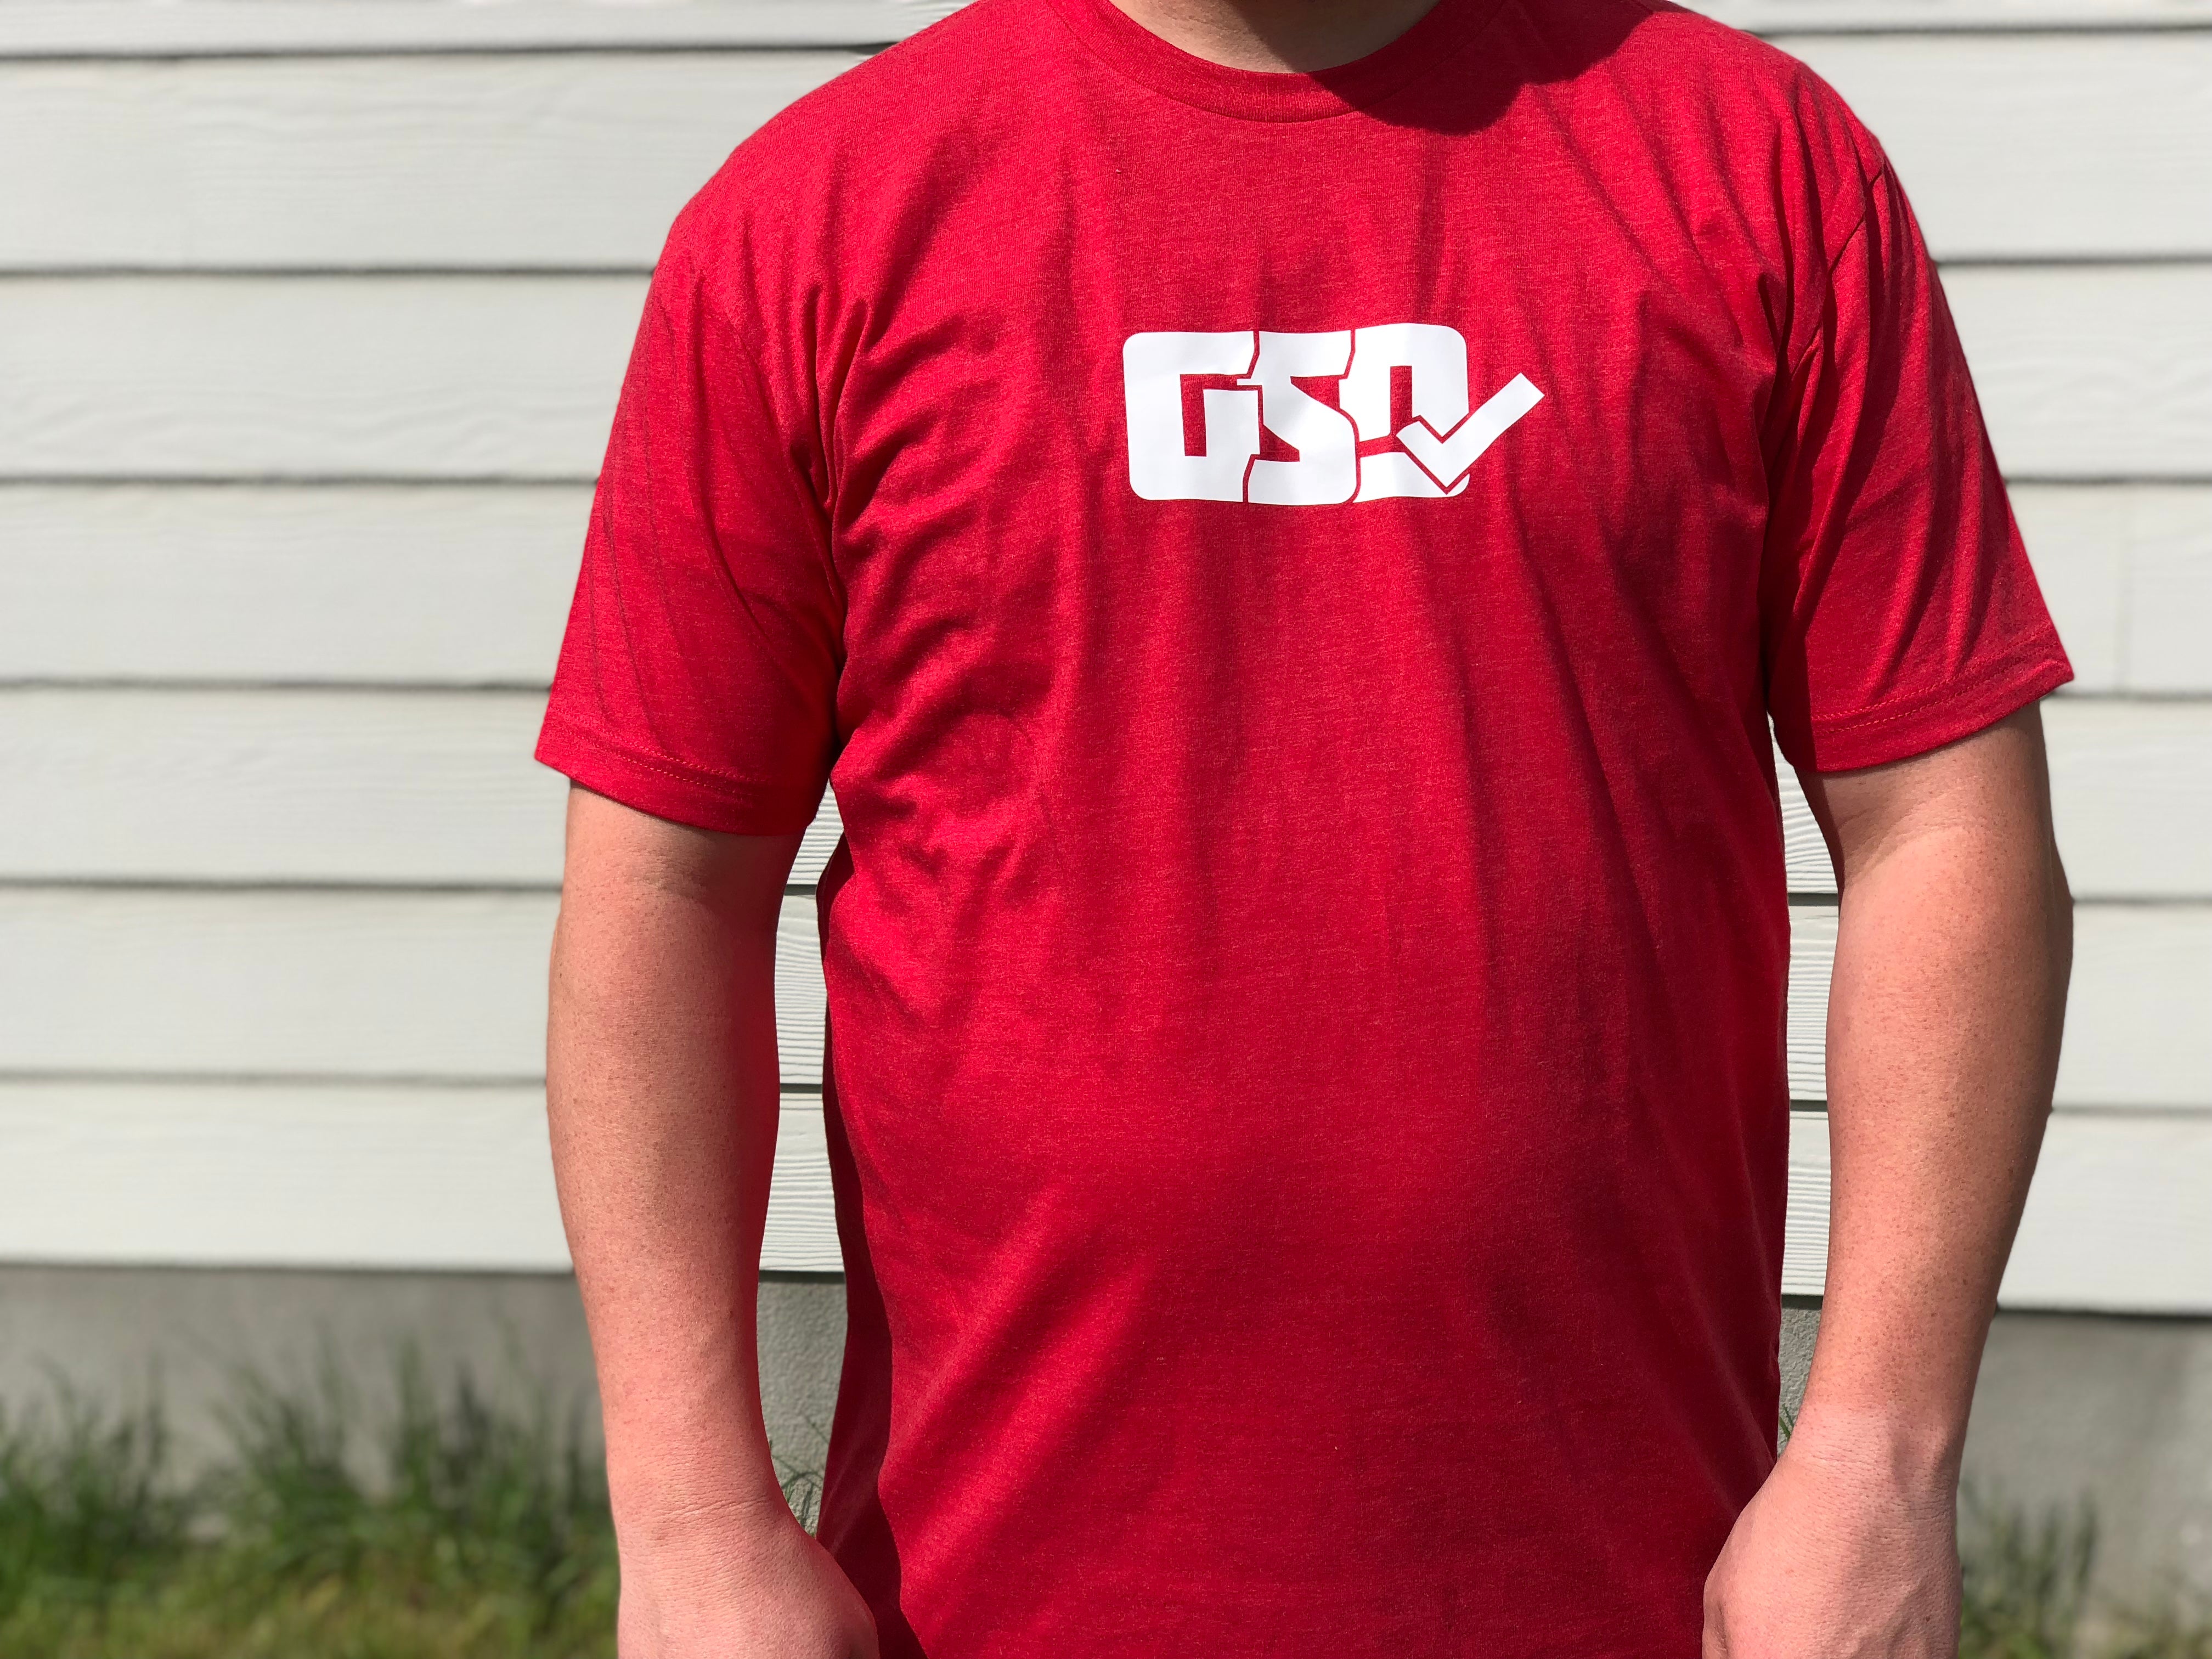 GSD T-Shirt - Red / White - “Pete Rose”